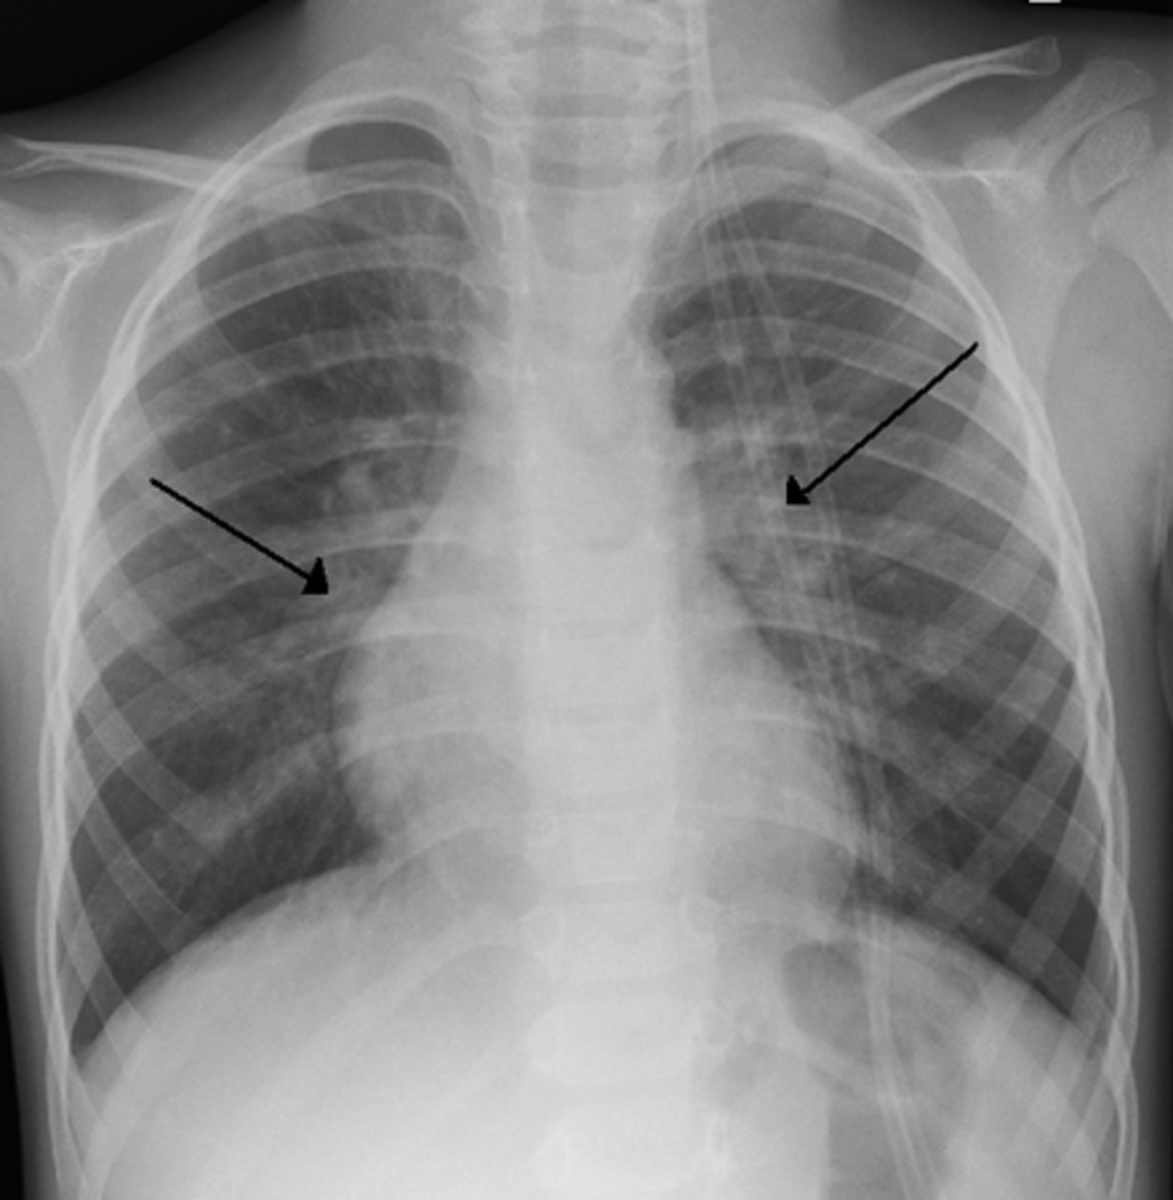 X-ray of a child with RSV bronchiolitis showing the typical bilateral perihilar fullness